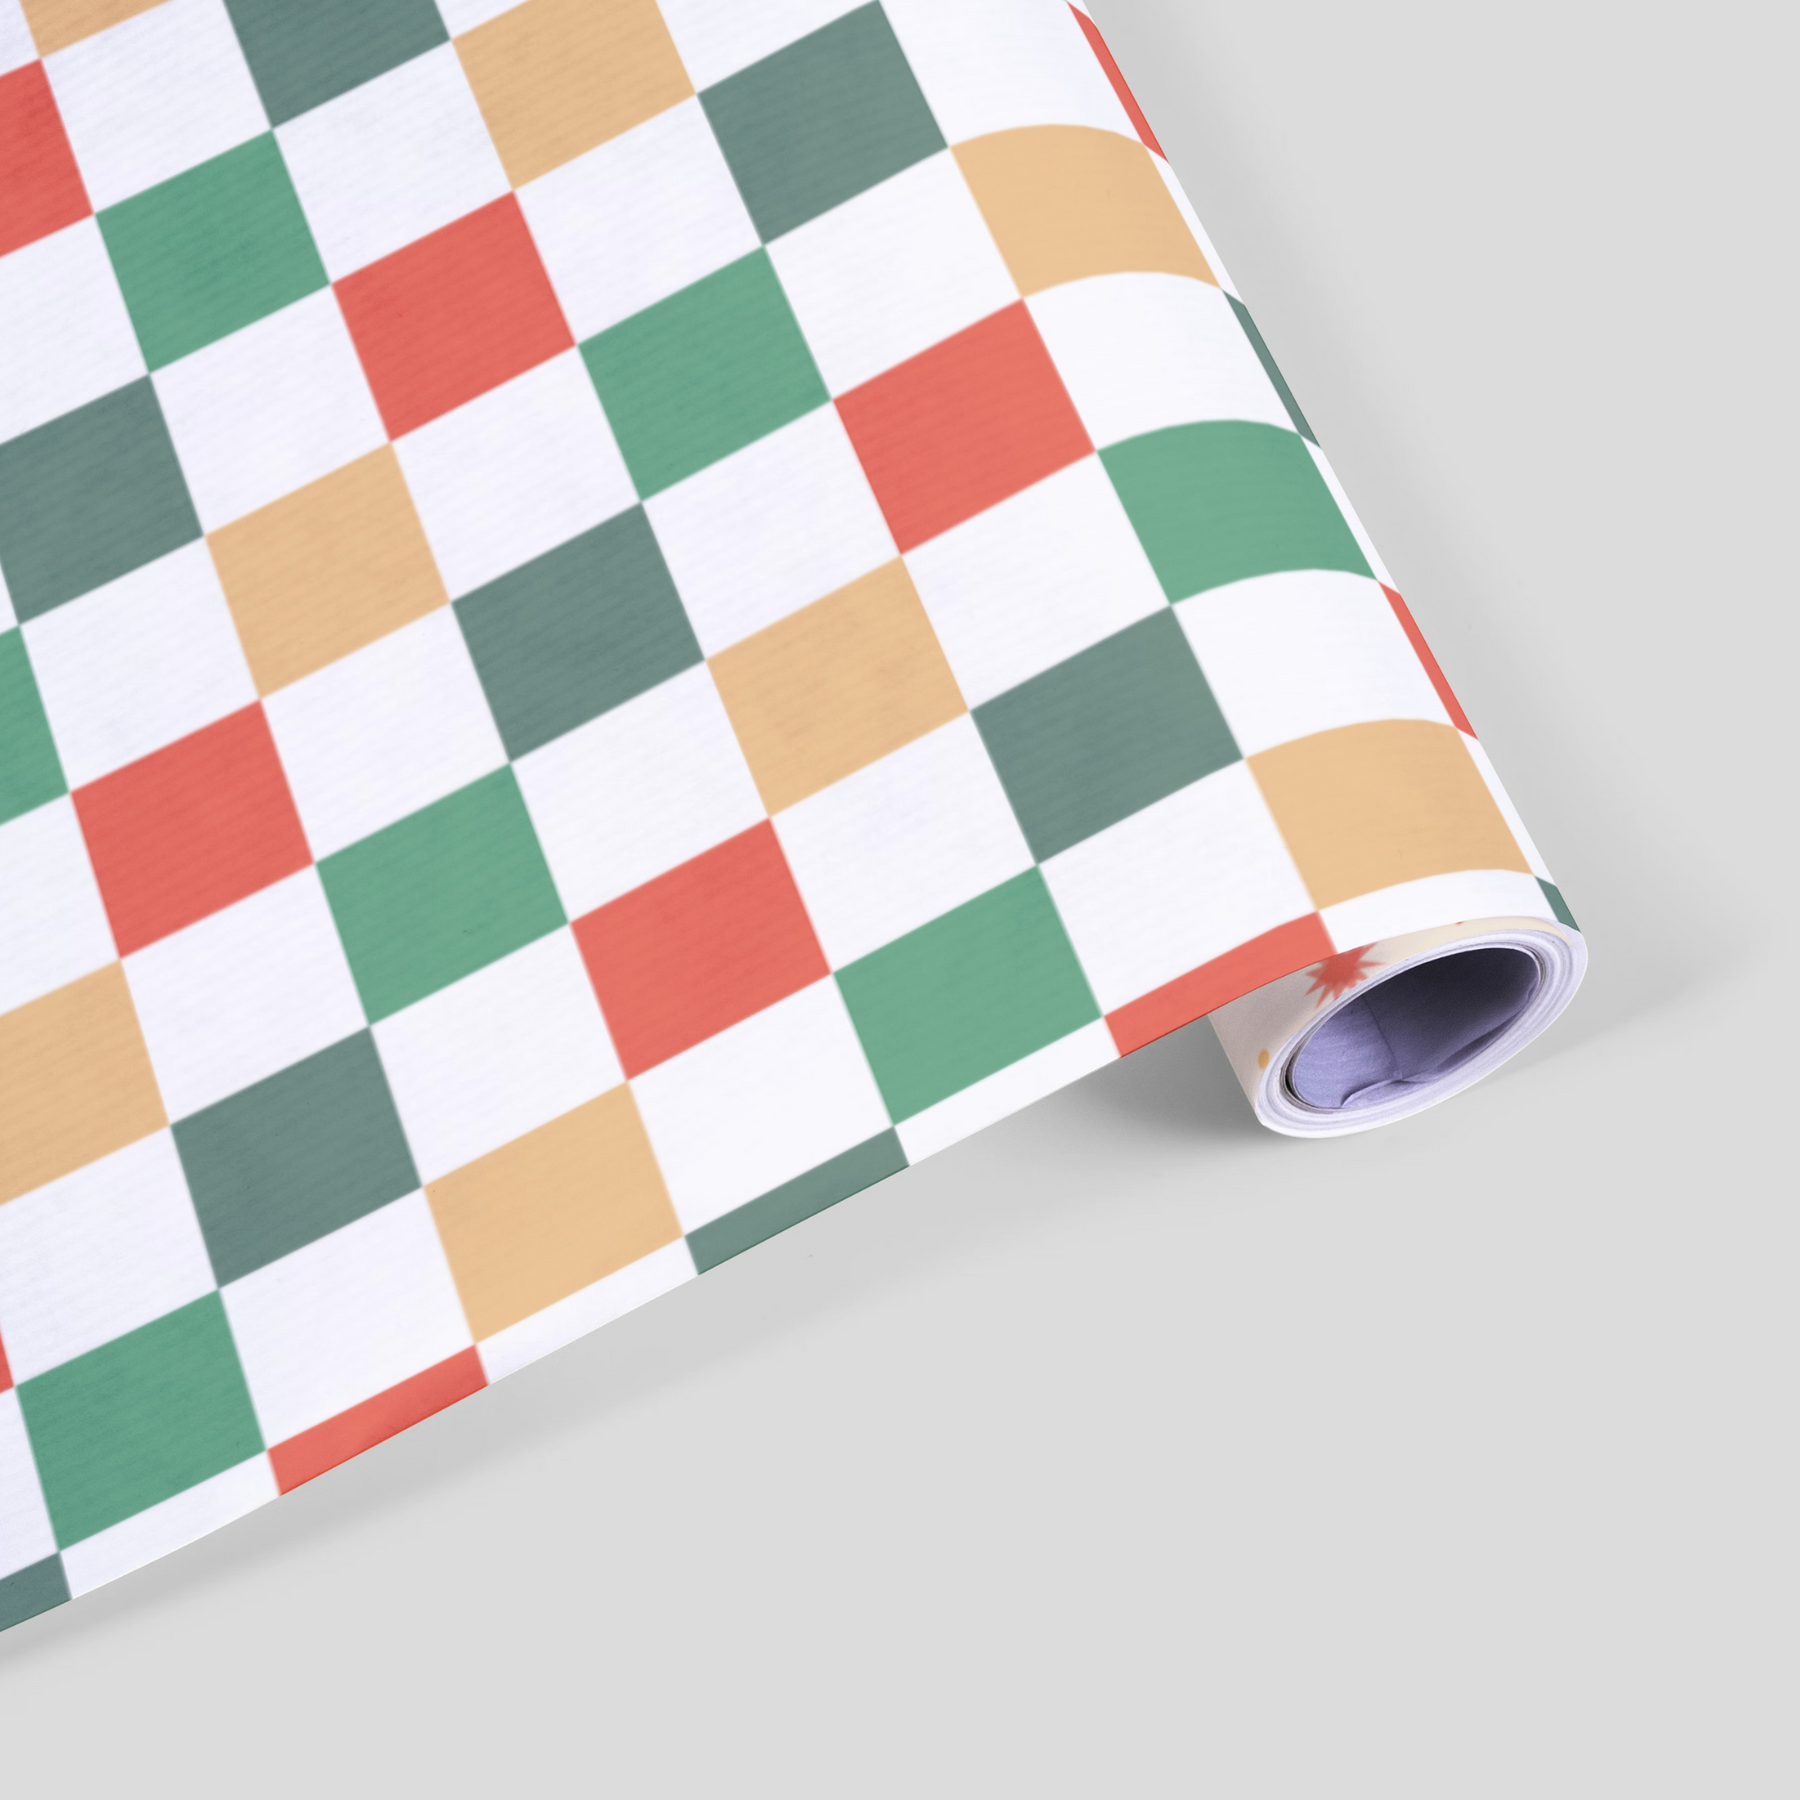 Double-sided Wrapping Paper Sheet: Santa